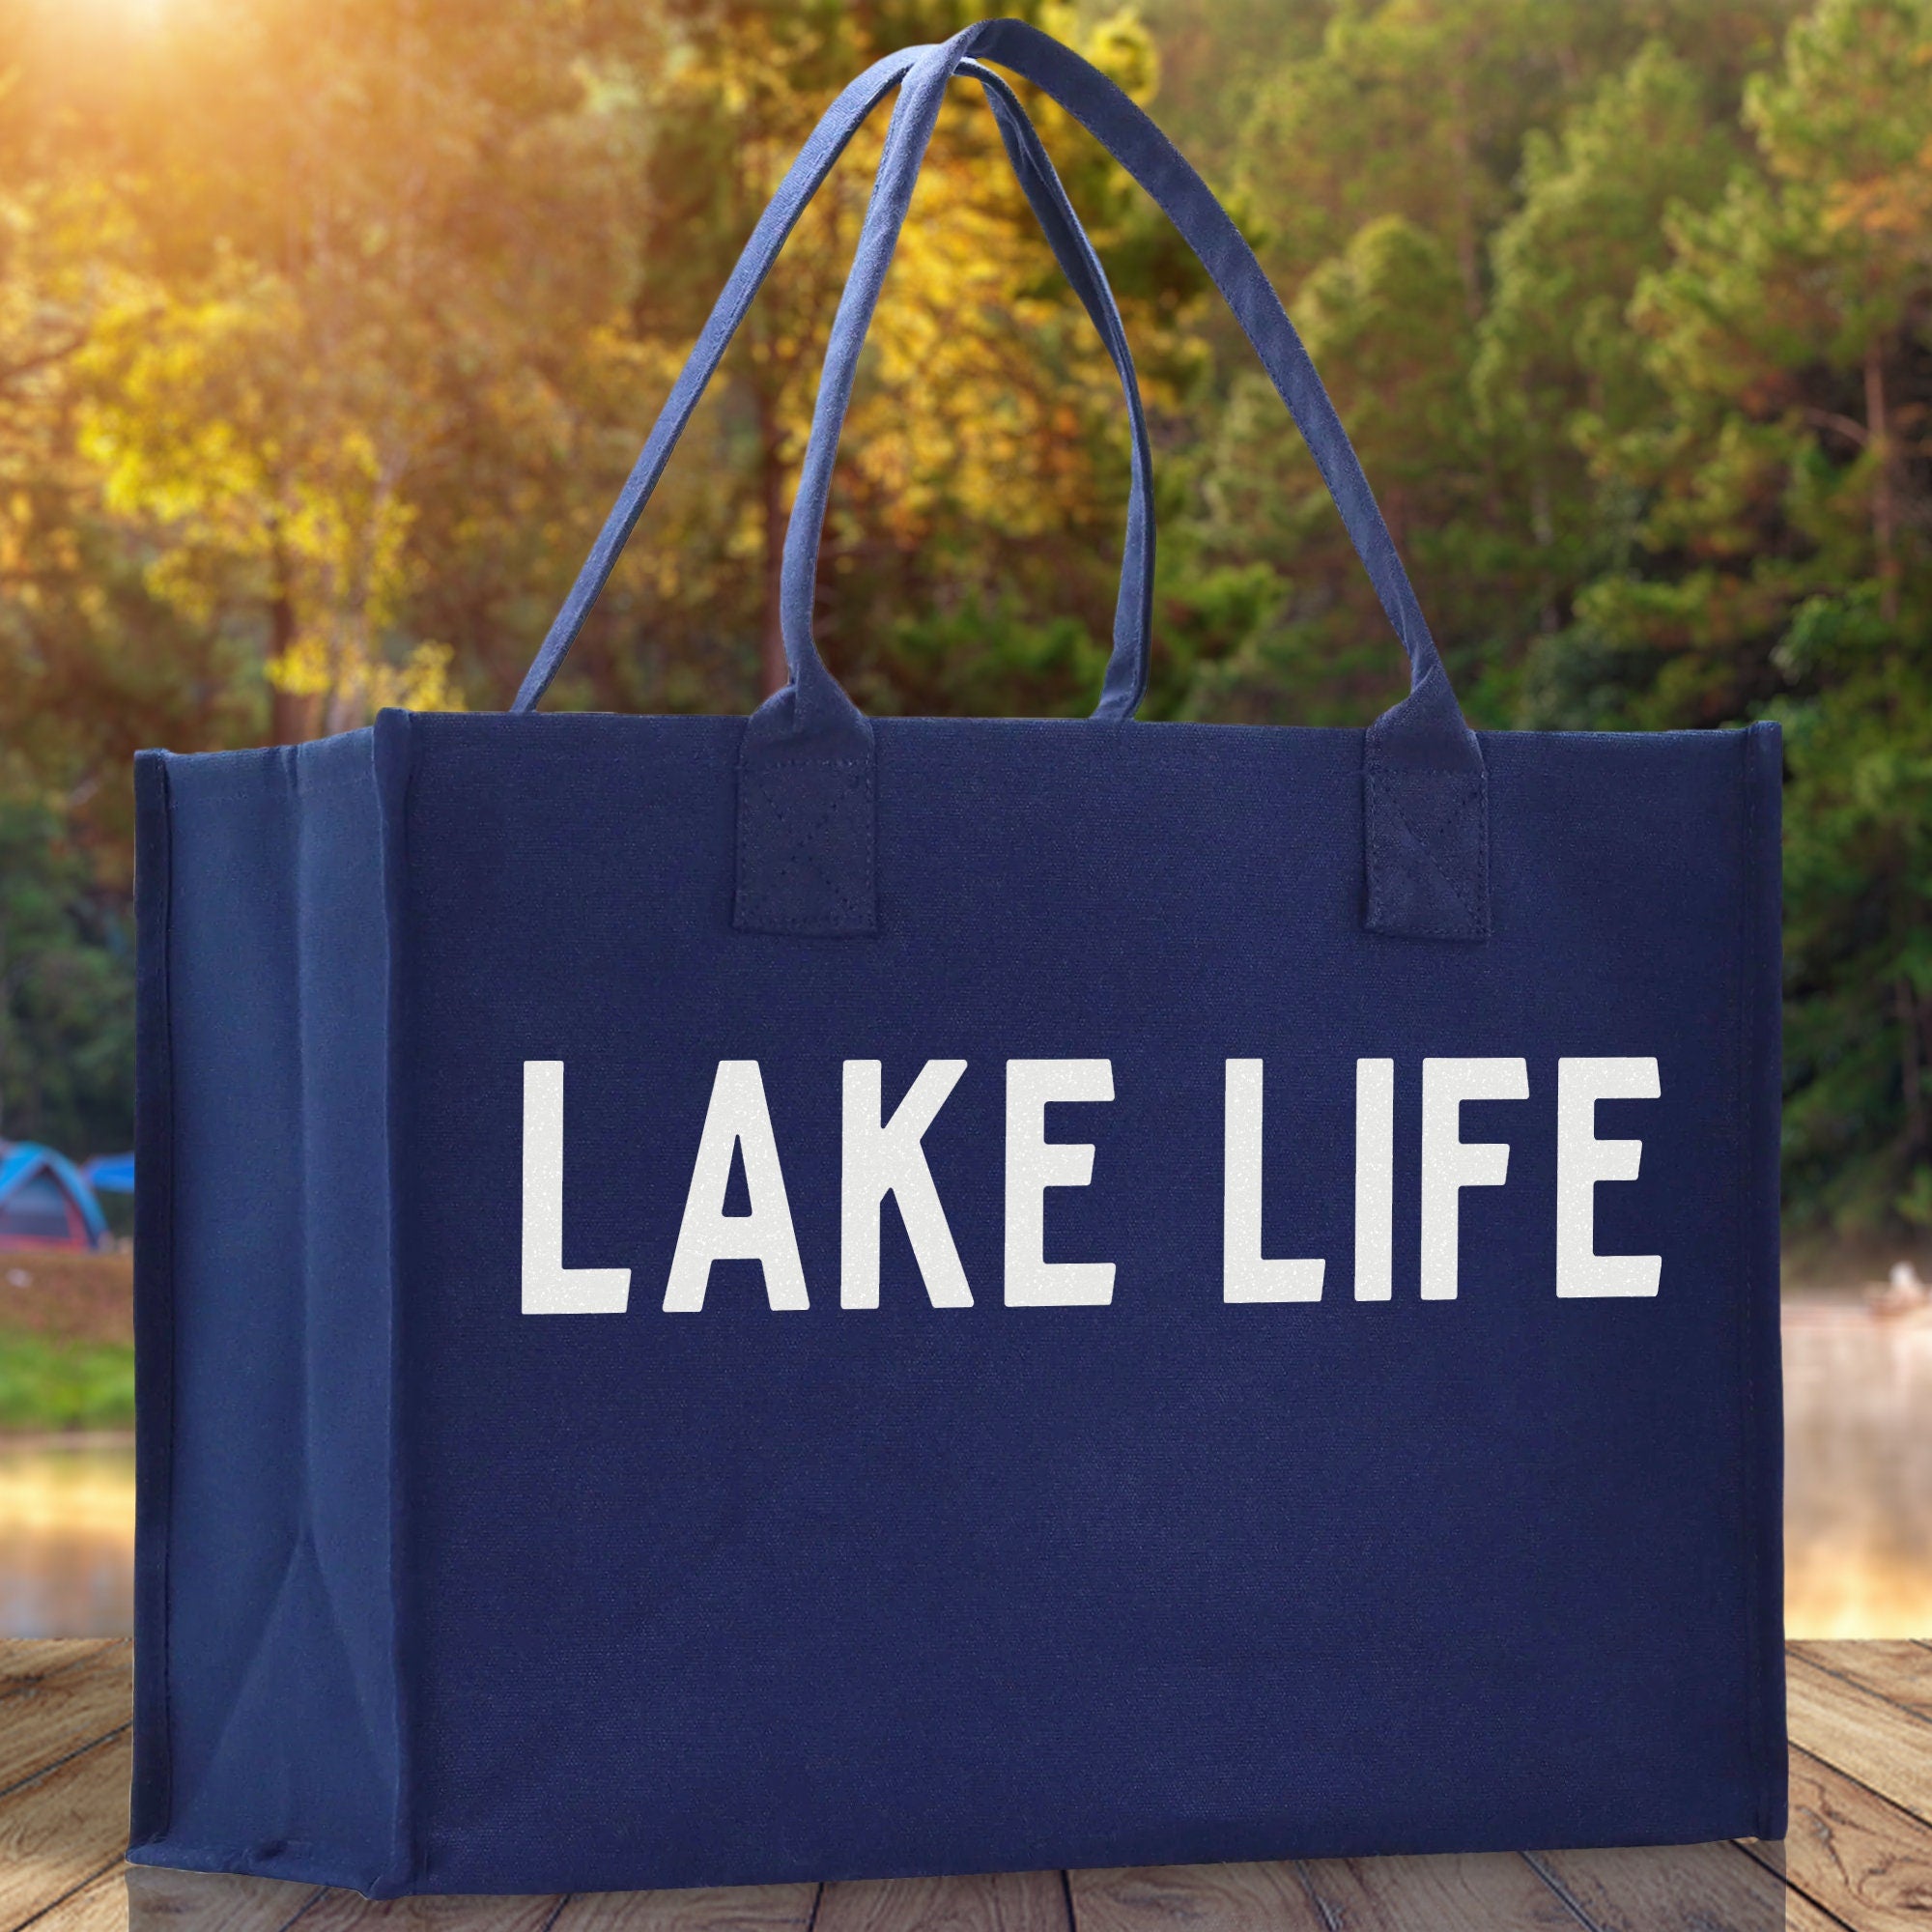 Lake Life Cotton Canvas Chic Beach Tote Bag Multipurpose Tote Weekender Tote Gift for Her Outdoor Tote Vacation Tote Large Beach Bag